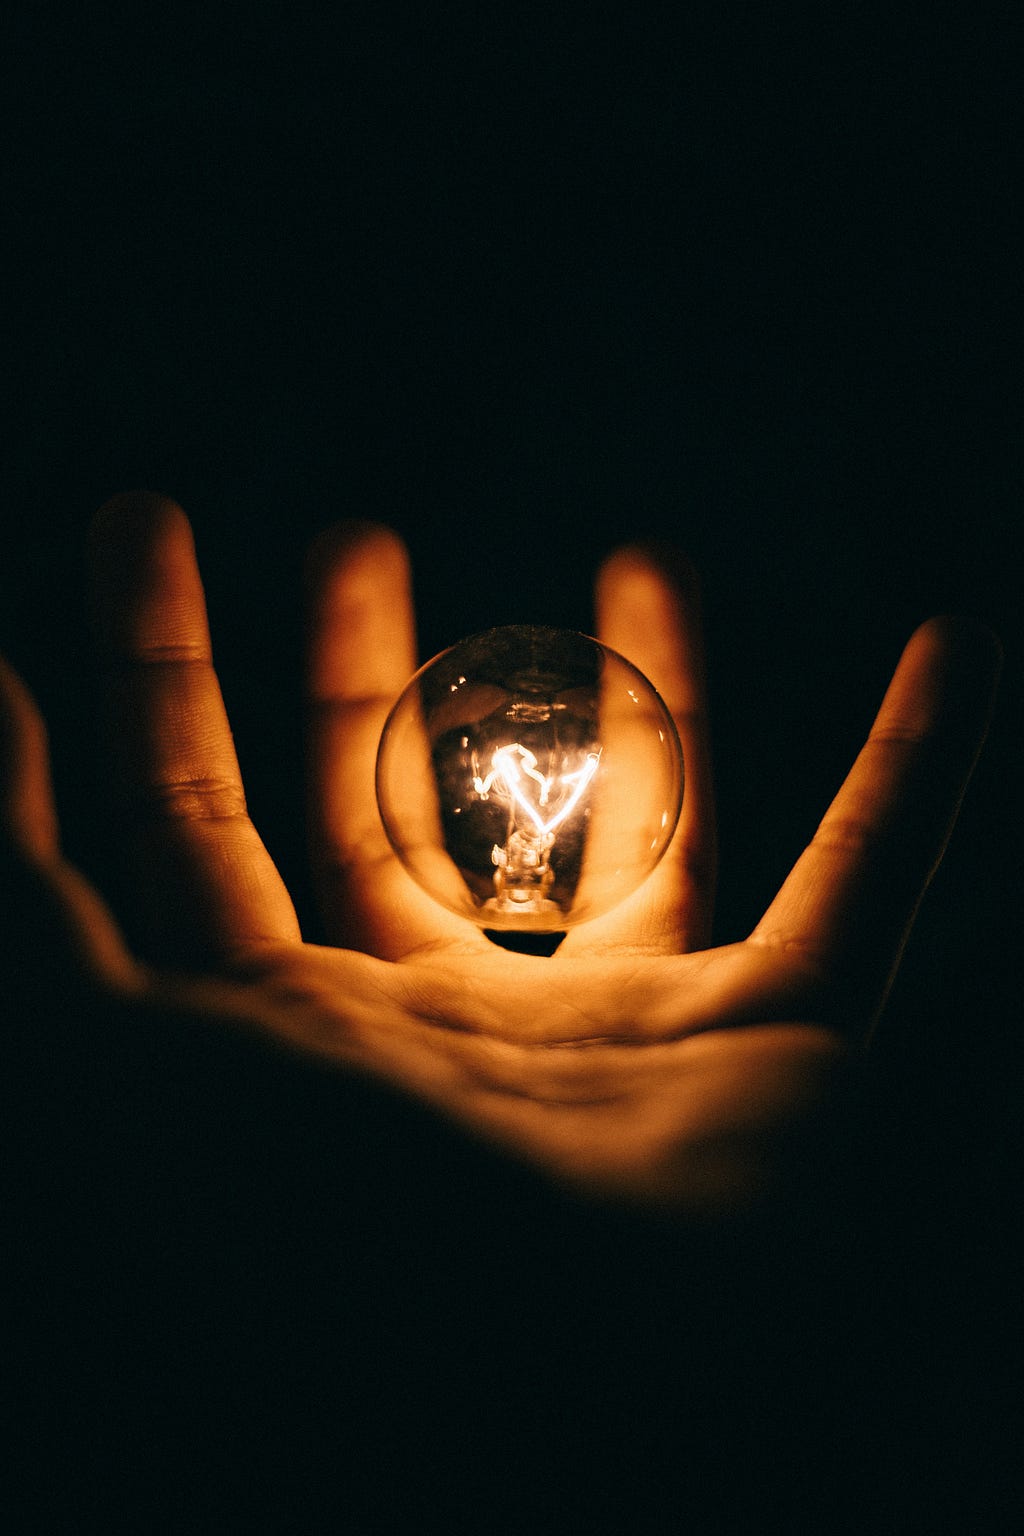 glowing lightbulb in the open palm of a hand